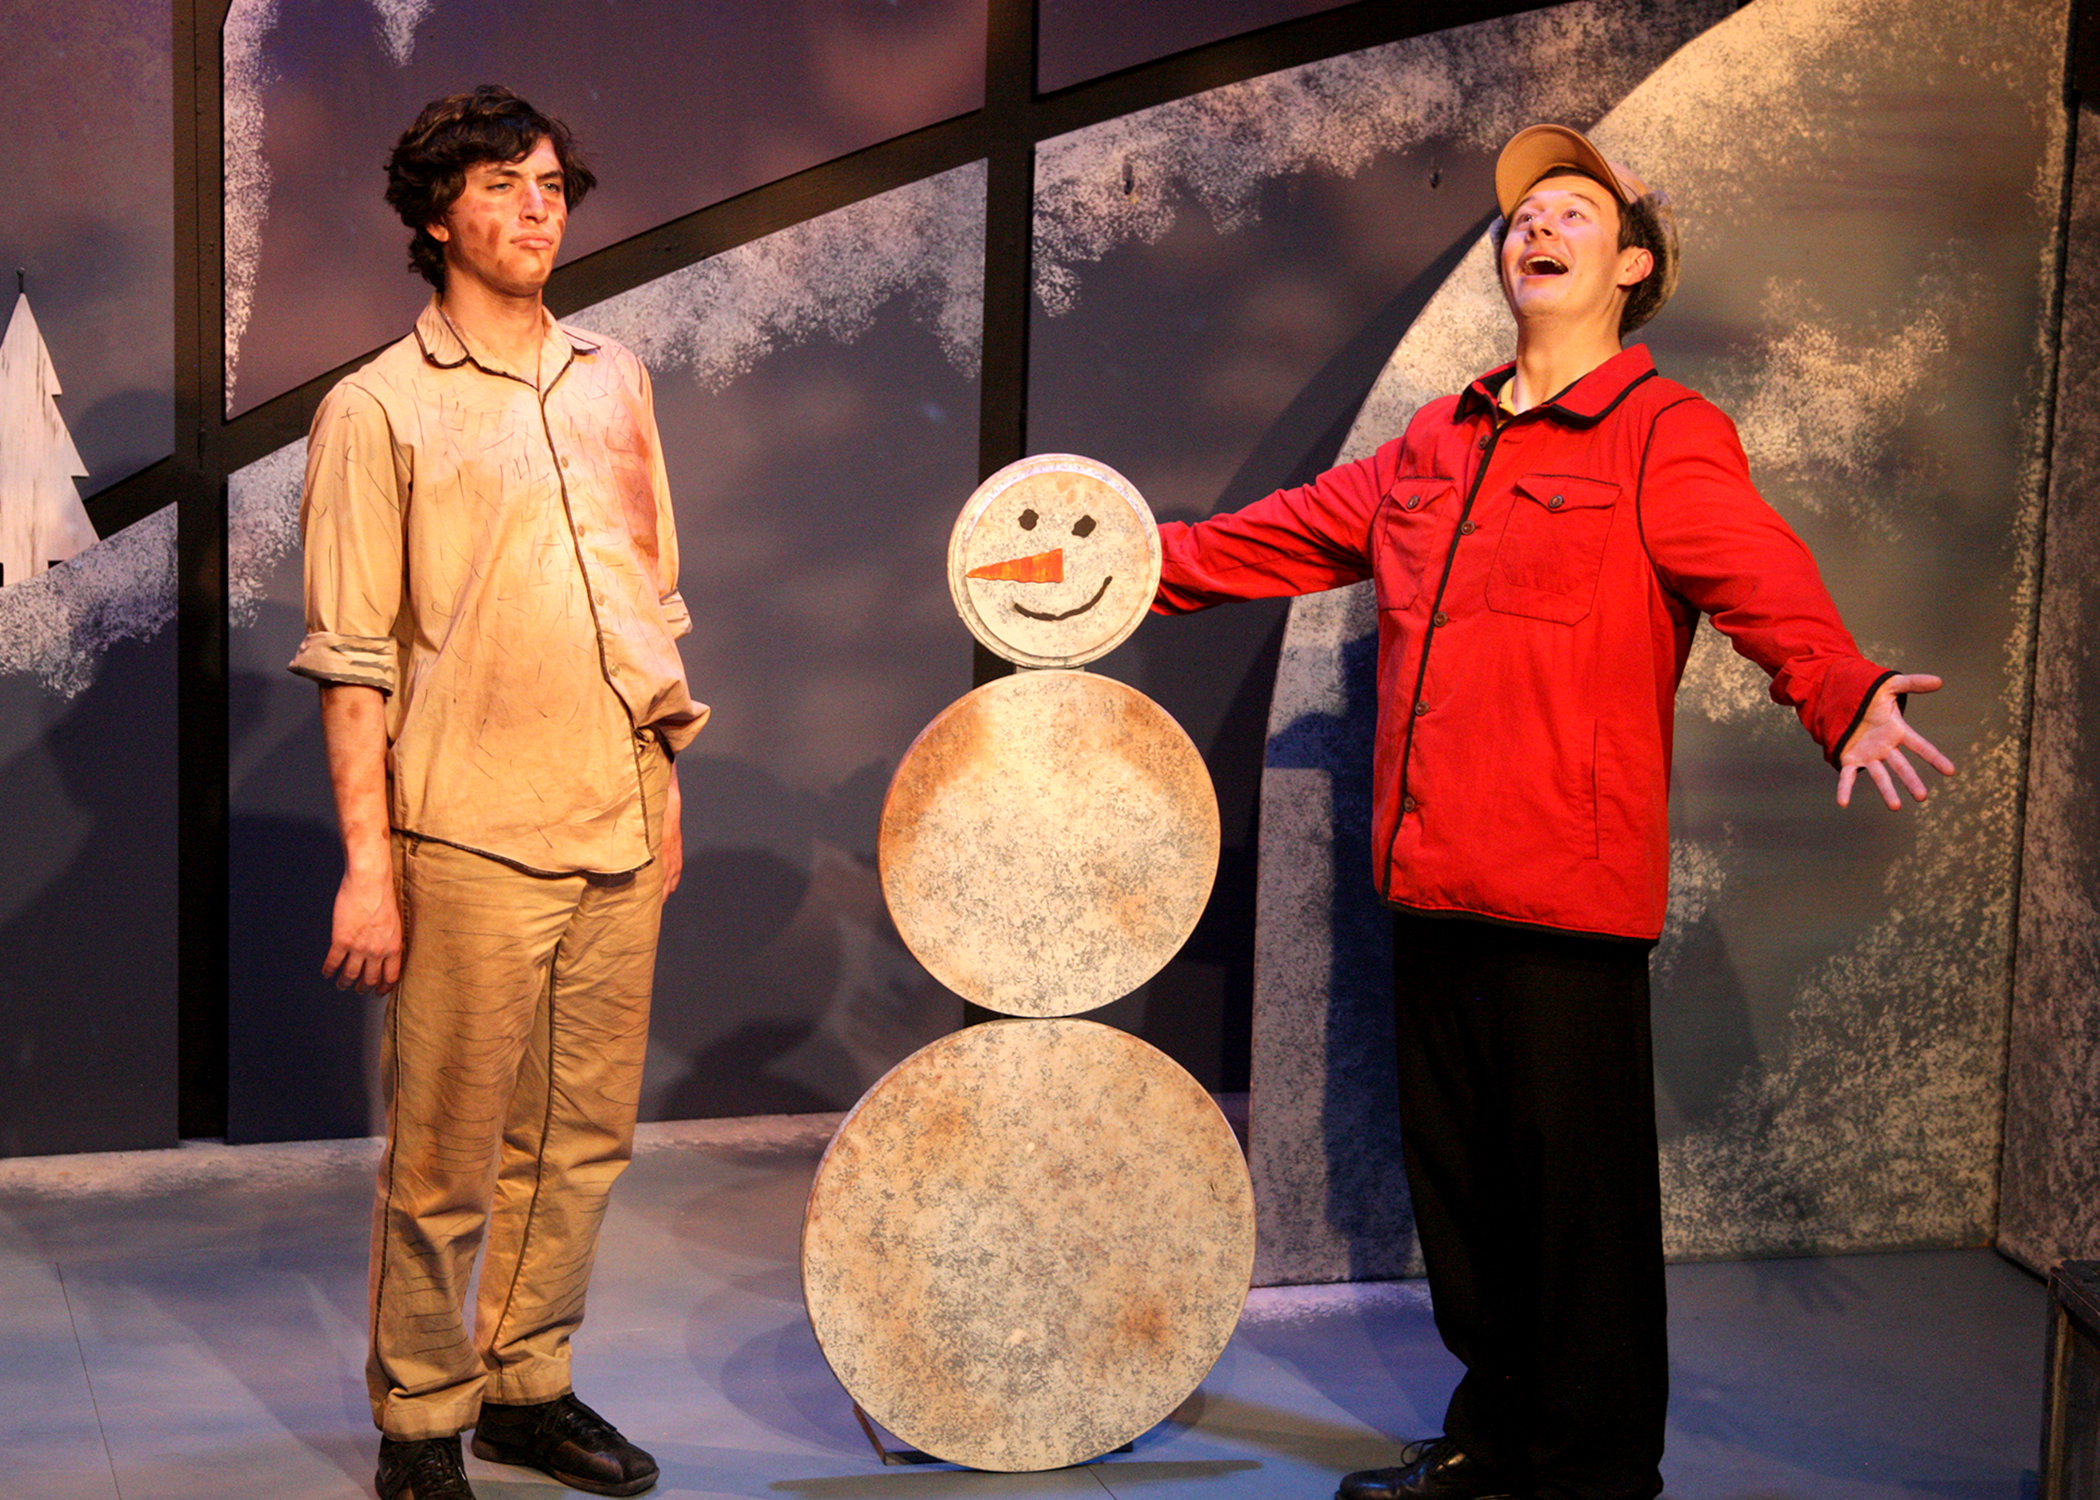 Nathan Shube and Matt Takahashi in the encore presentation of “A Charlie Brown Christmas.” This live version of Charles Schulz’s classic television special adapted by Eric Schaeffer and directed by James Michael McHale will run thru December 19, 2021 on the Fyda-Mar Stage at the Bette Aitken theater arts Center.